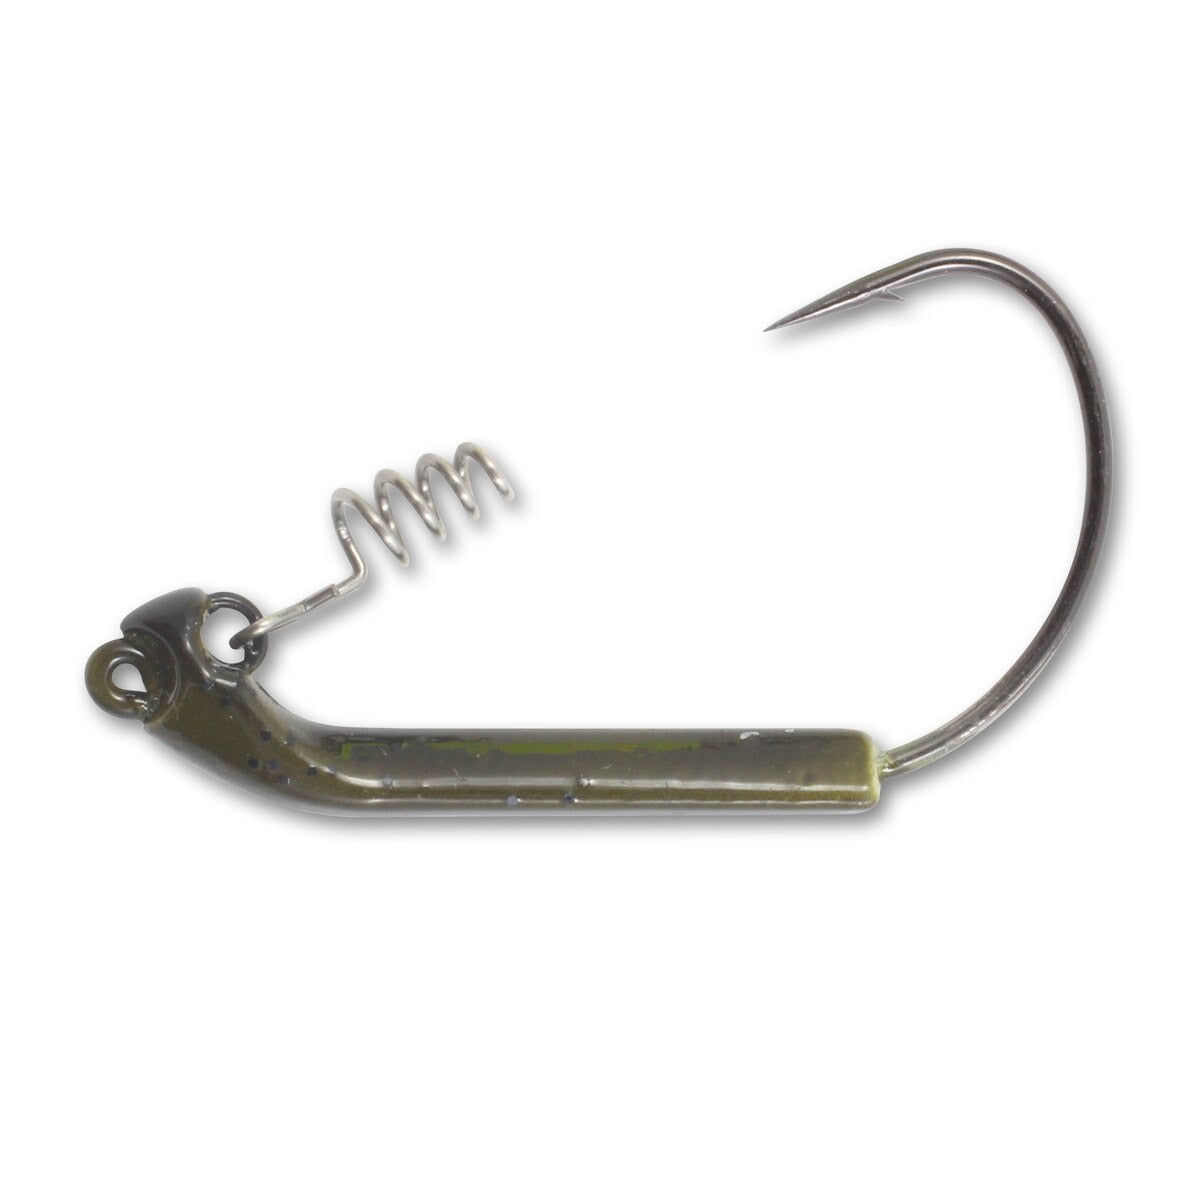 Mister Twister 4 Double Tail, White, Black, One Size (DT10-1) : Fishing  Jigs : Sports & Outdoors 